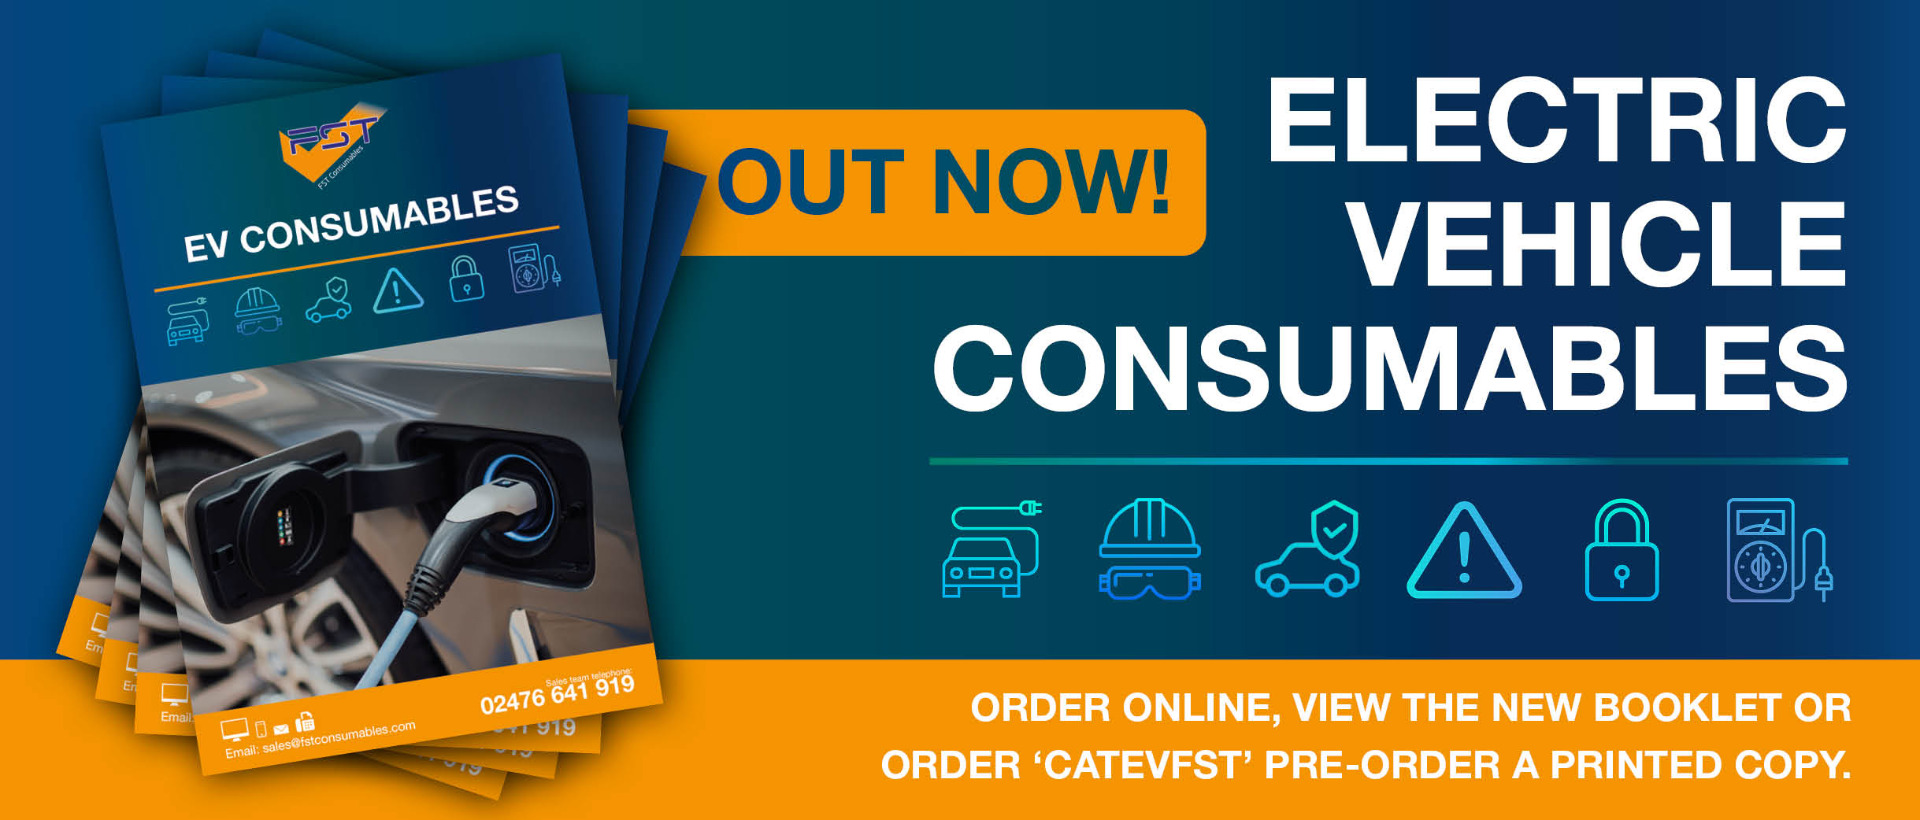 ELECTRIC VEHICLE CONSUMABLES - OUT NOW! ORDER ONLINE, VIEW THE NEW BOOKLET OR ORDER 'CATEVFST' PRE-ORDER A PRINTED COPY.